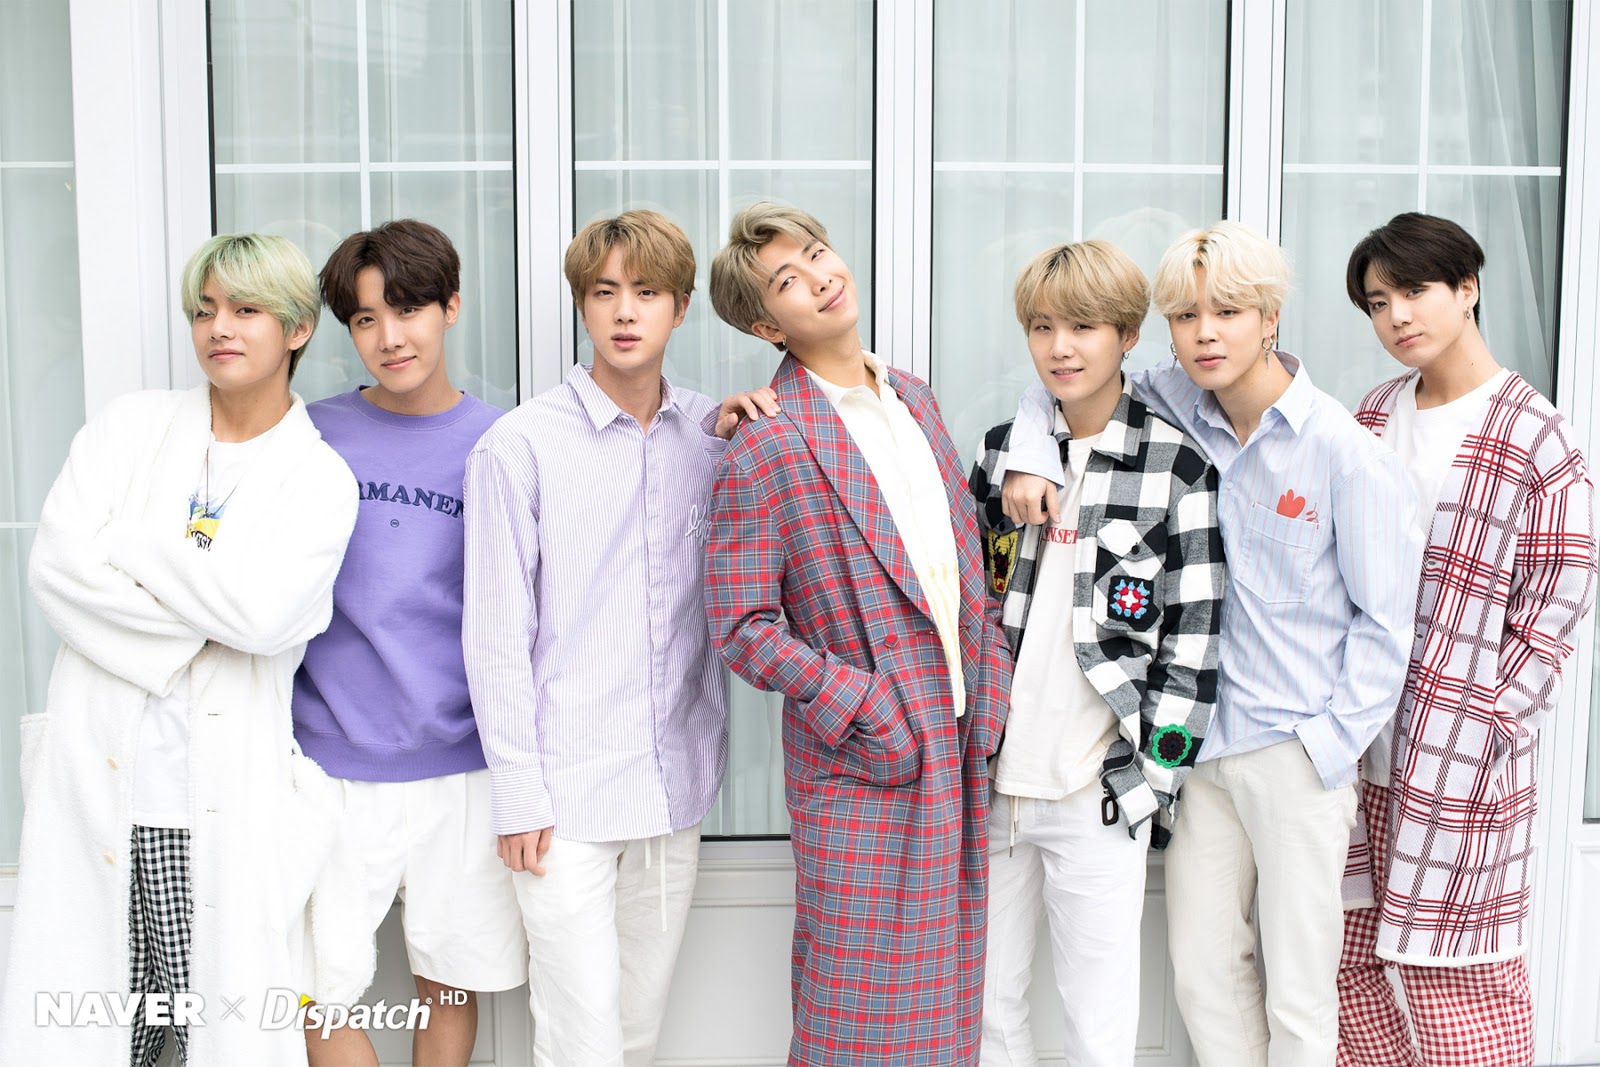 Naver X Dispatch Bts White Day Special Photoshoot Group Subunit Shots Circuits Of Fever